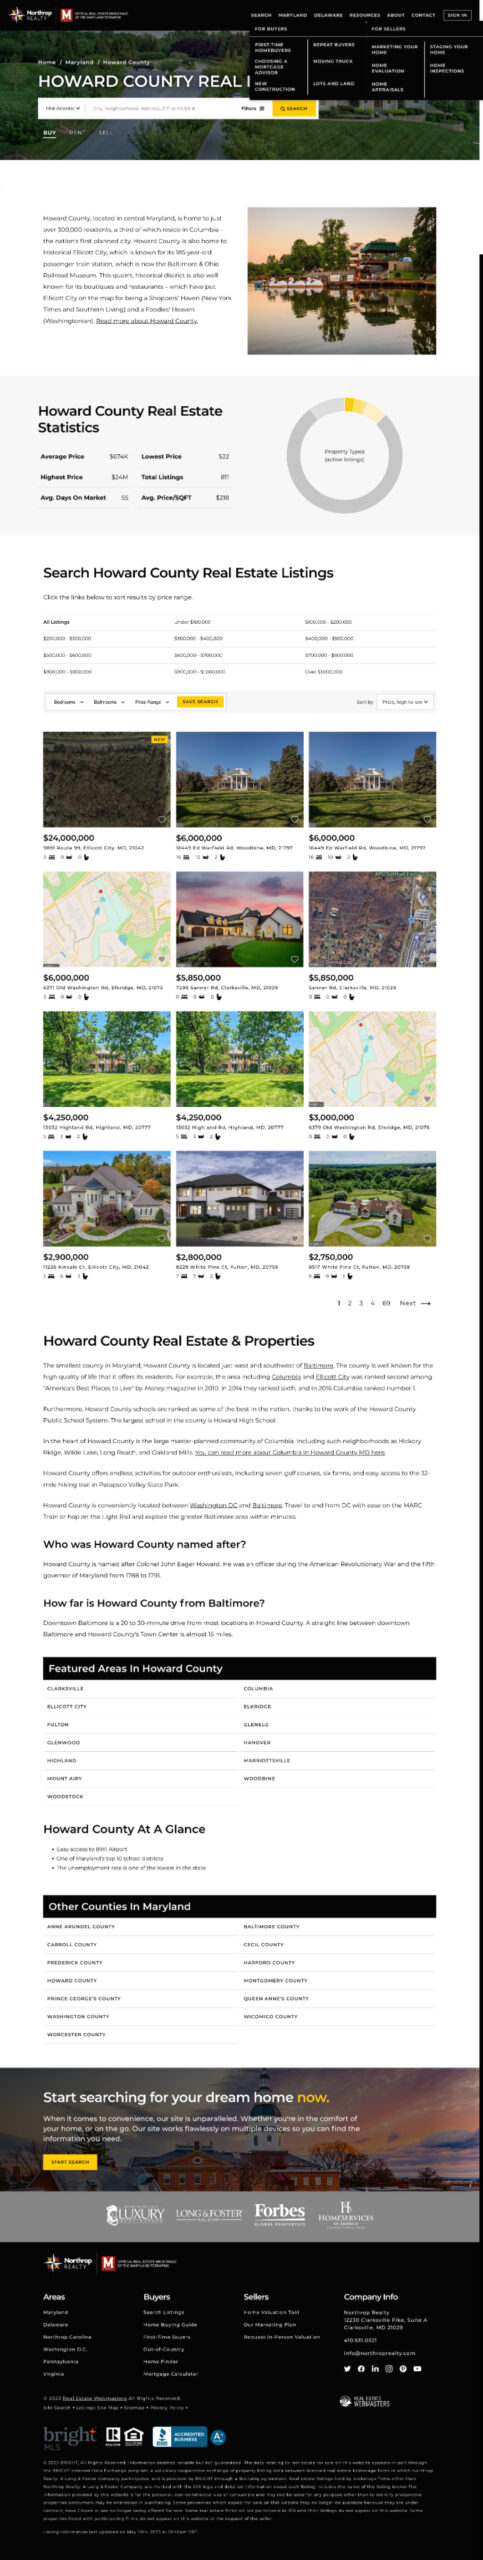 real estate webmasters example neighborhood page